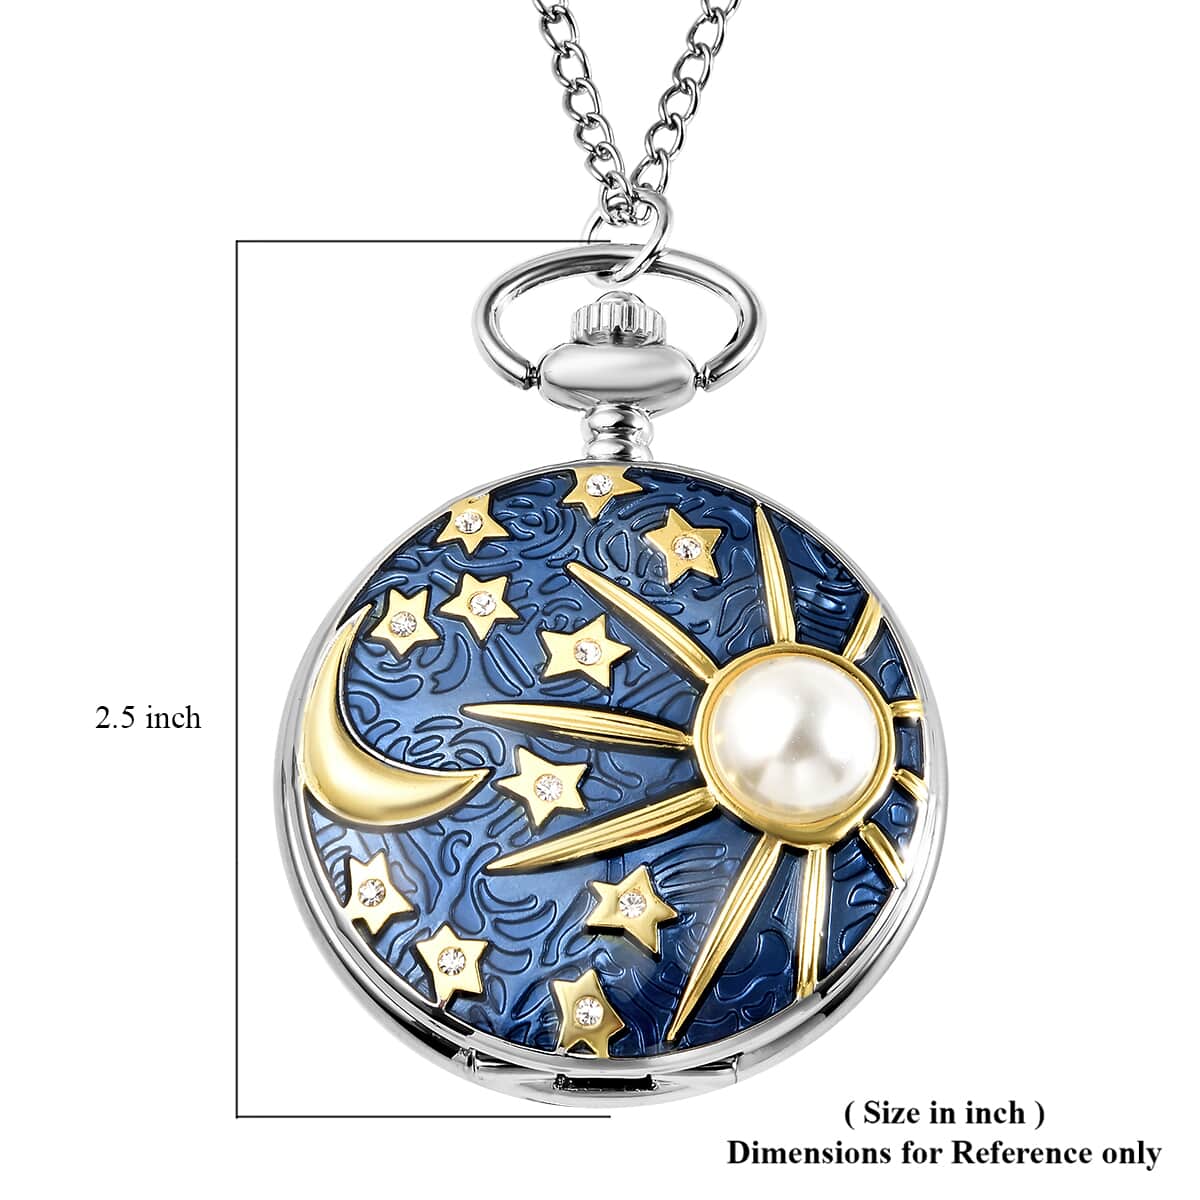 Strada White Crystal Japanese Movement Carving Moon & Star Pattern Pocket Watch in Goldtone with Chain in Silvertone 31 Inches image number 6